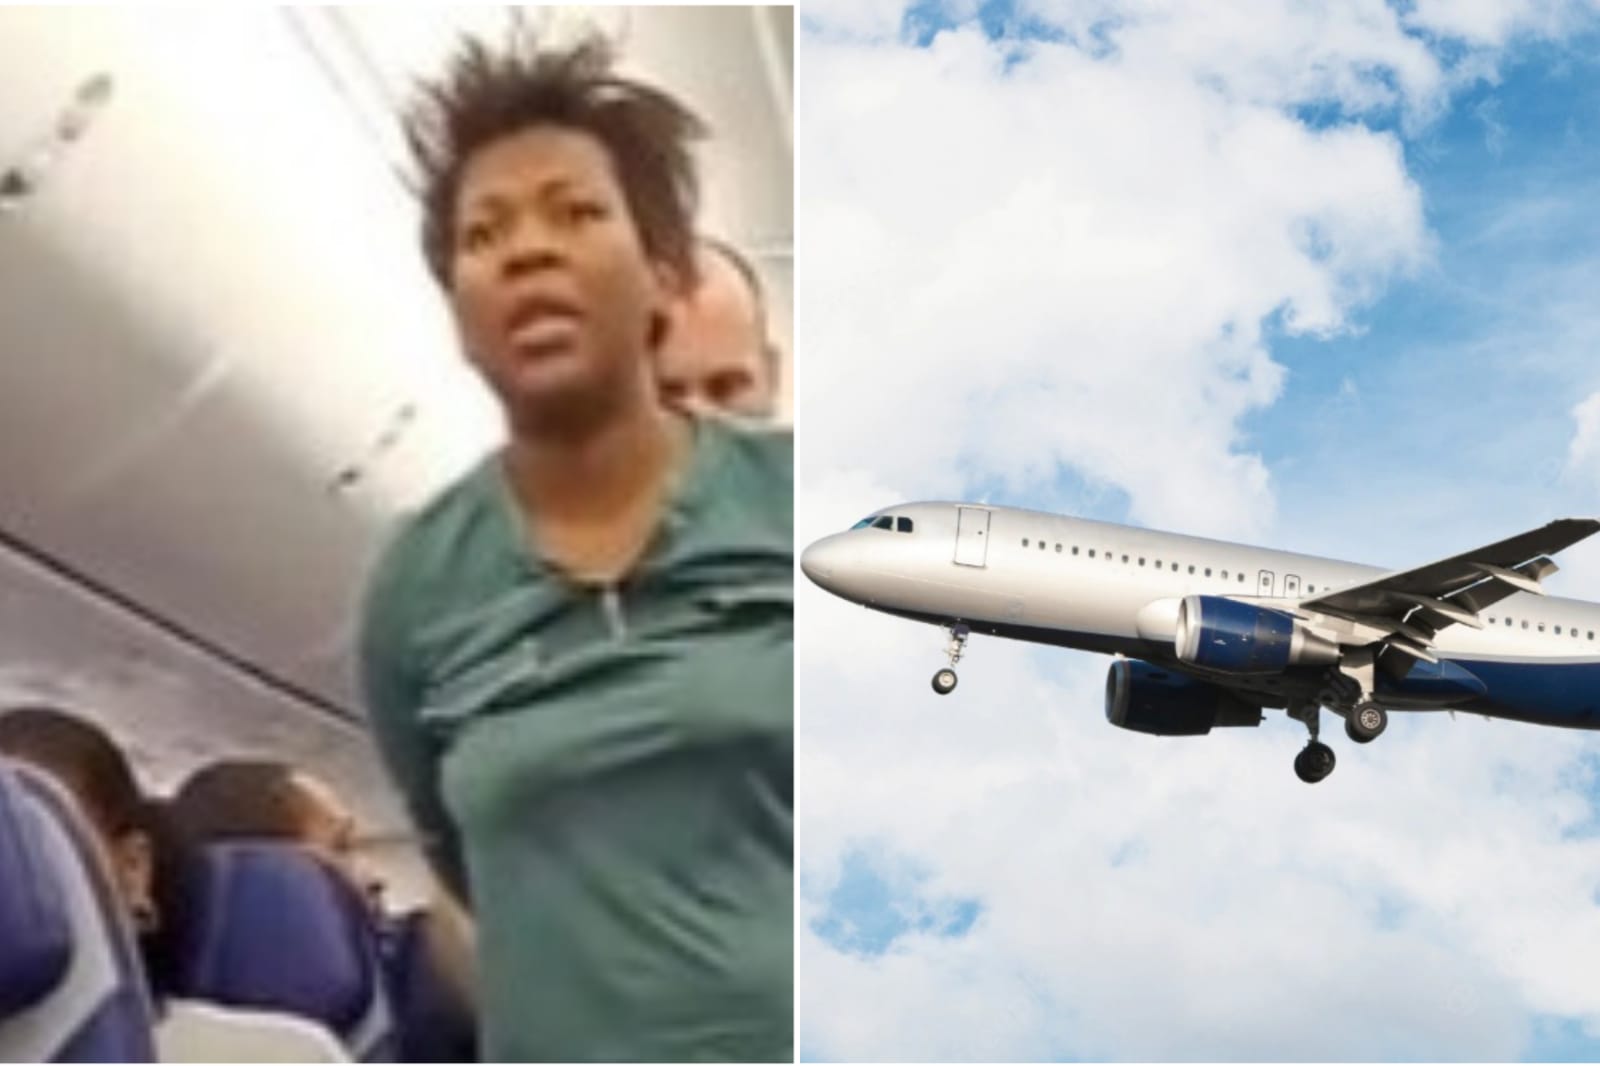 The passenger is arrested on the plane after 